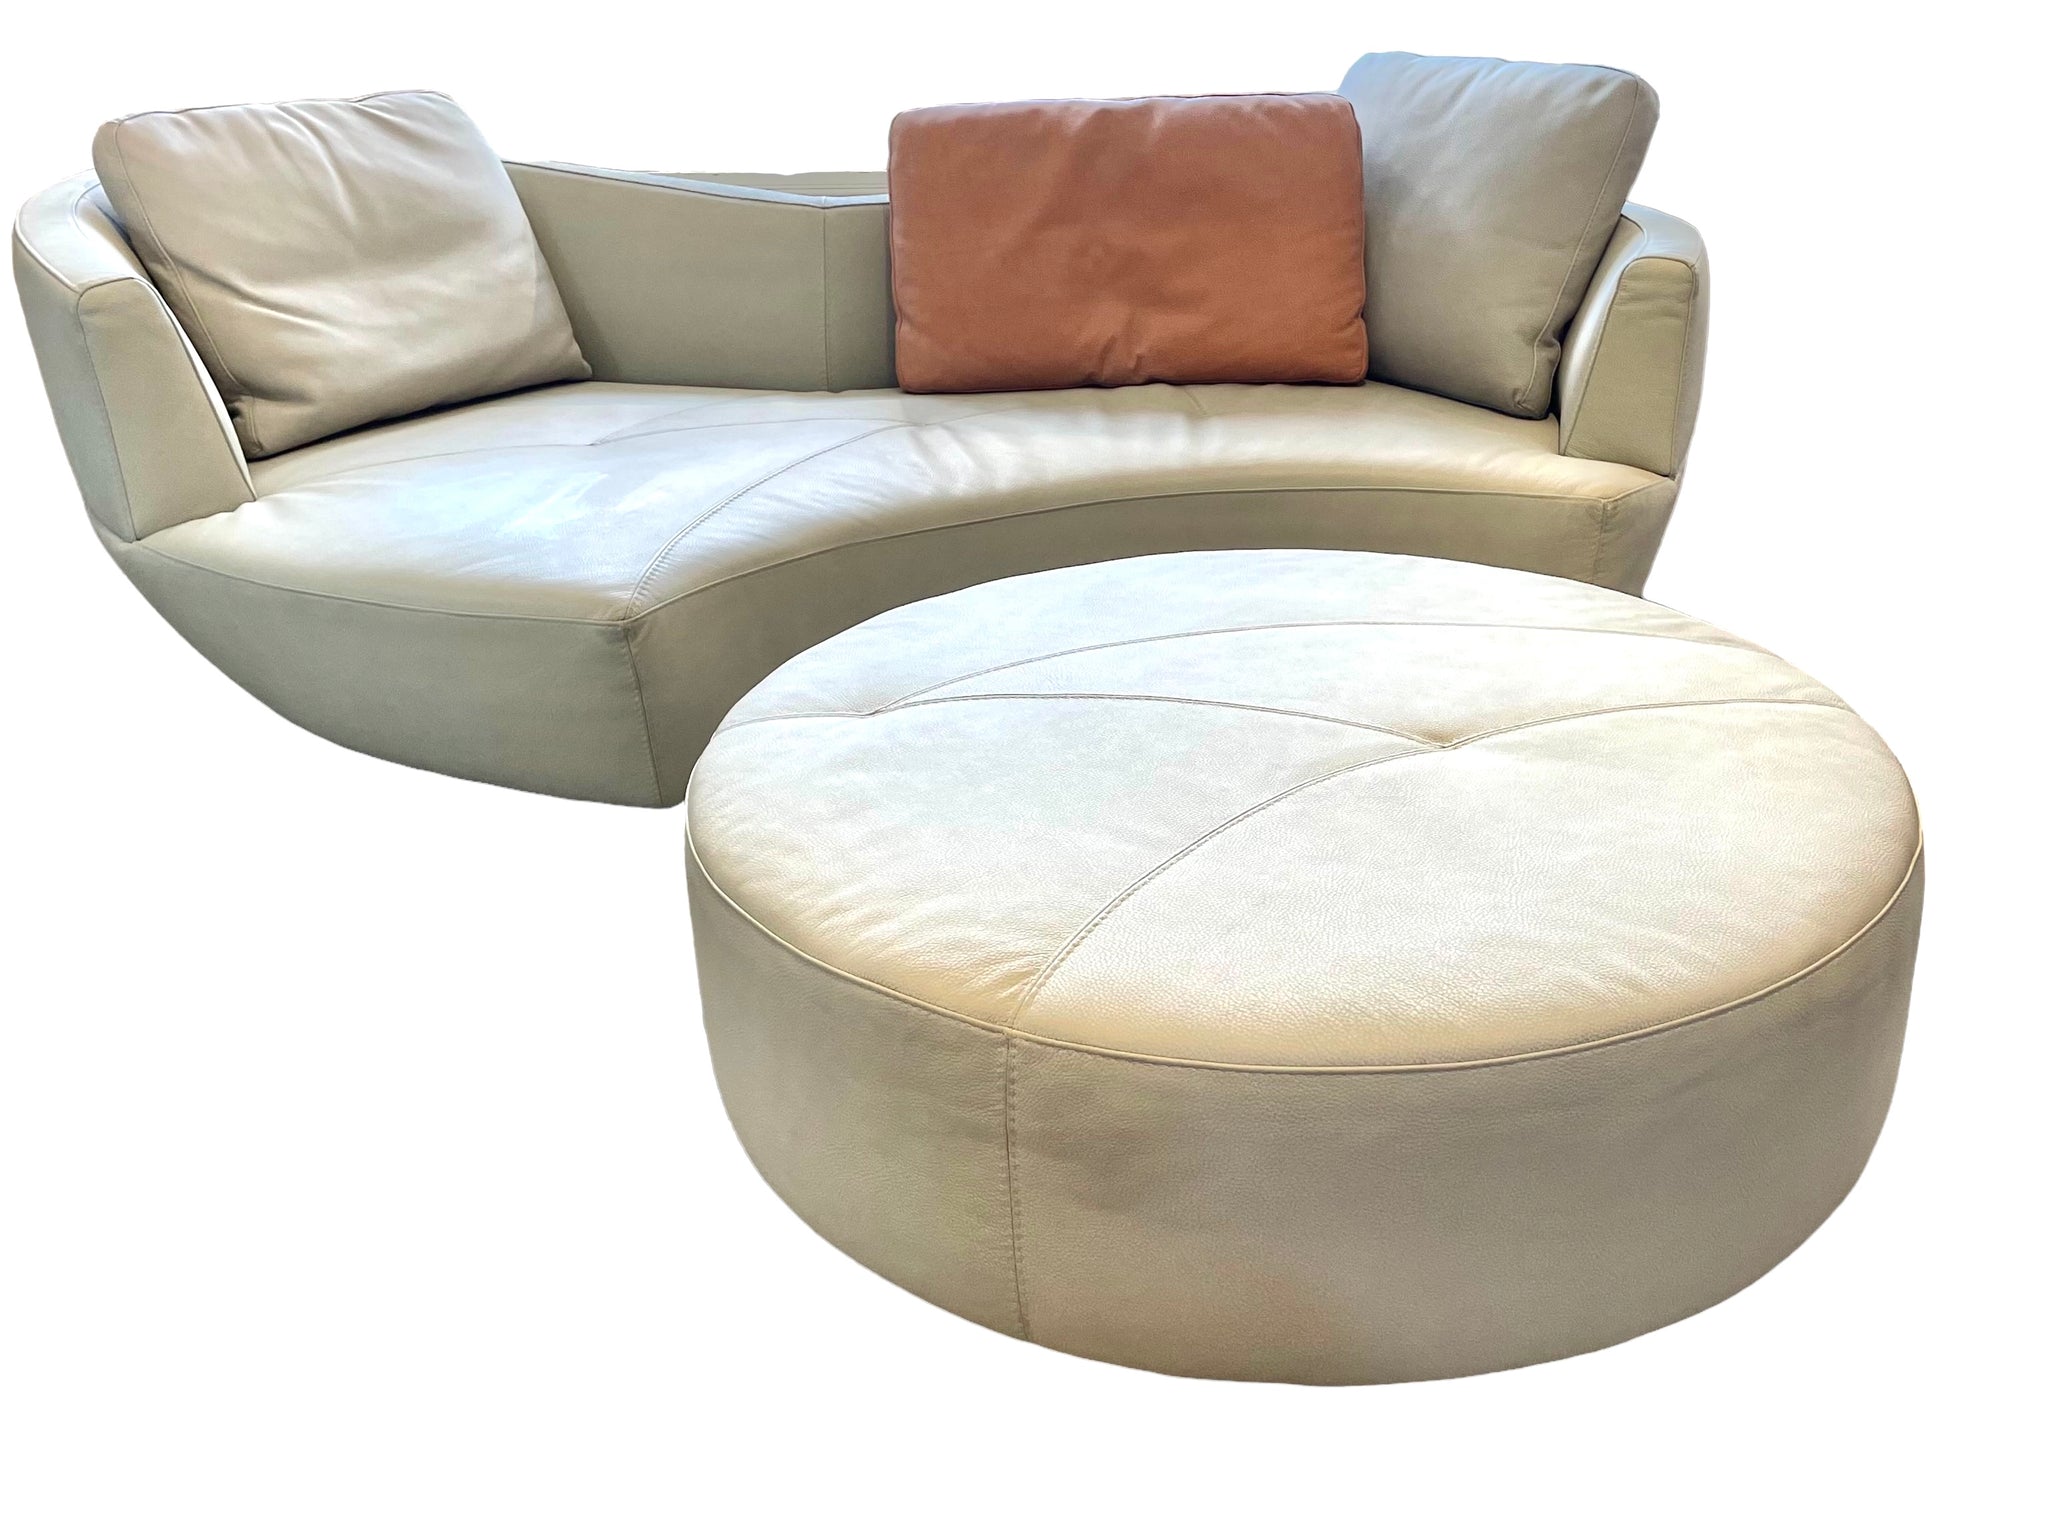 Roche Bobois Round Leather Digital Sofa with 3 Leather Pillows [Ottoman Sold Separately]